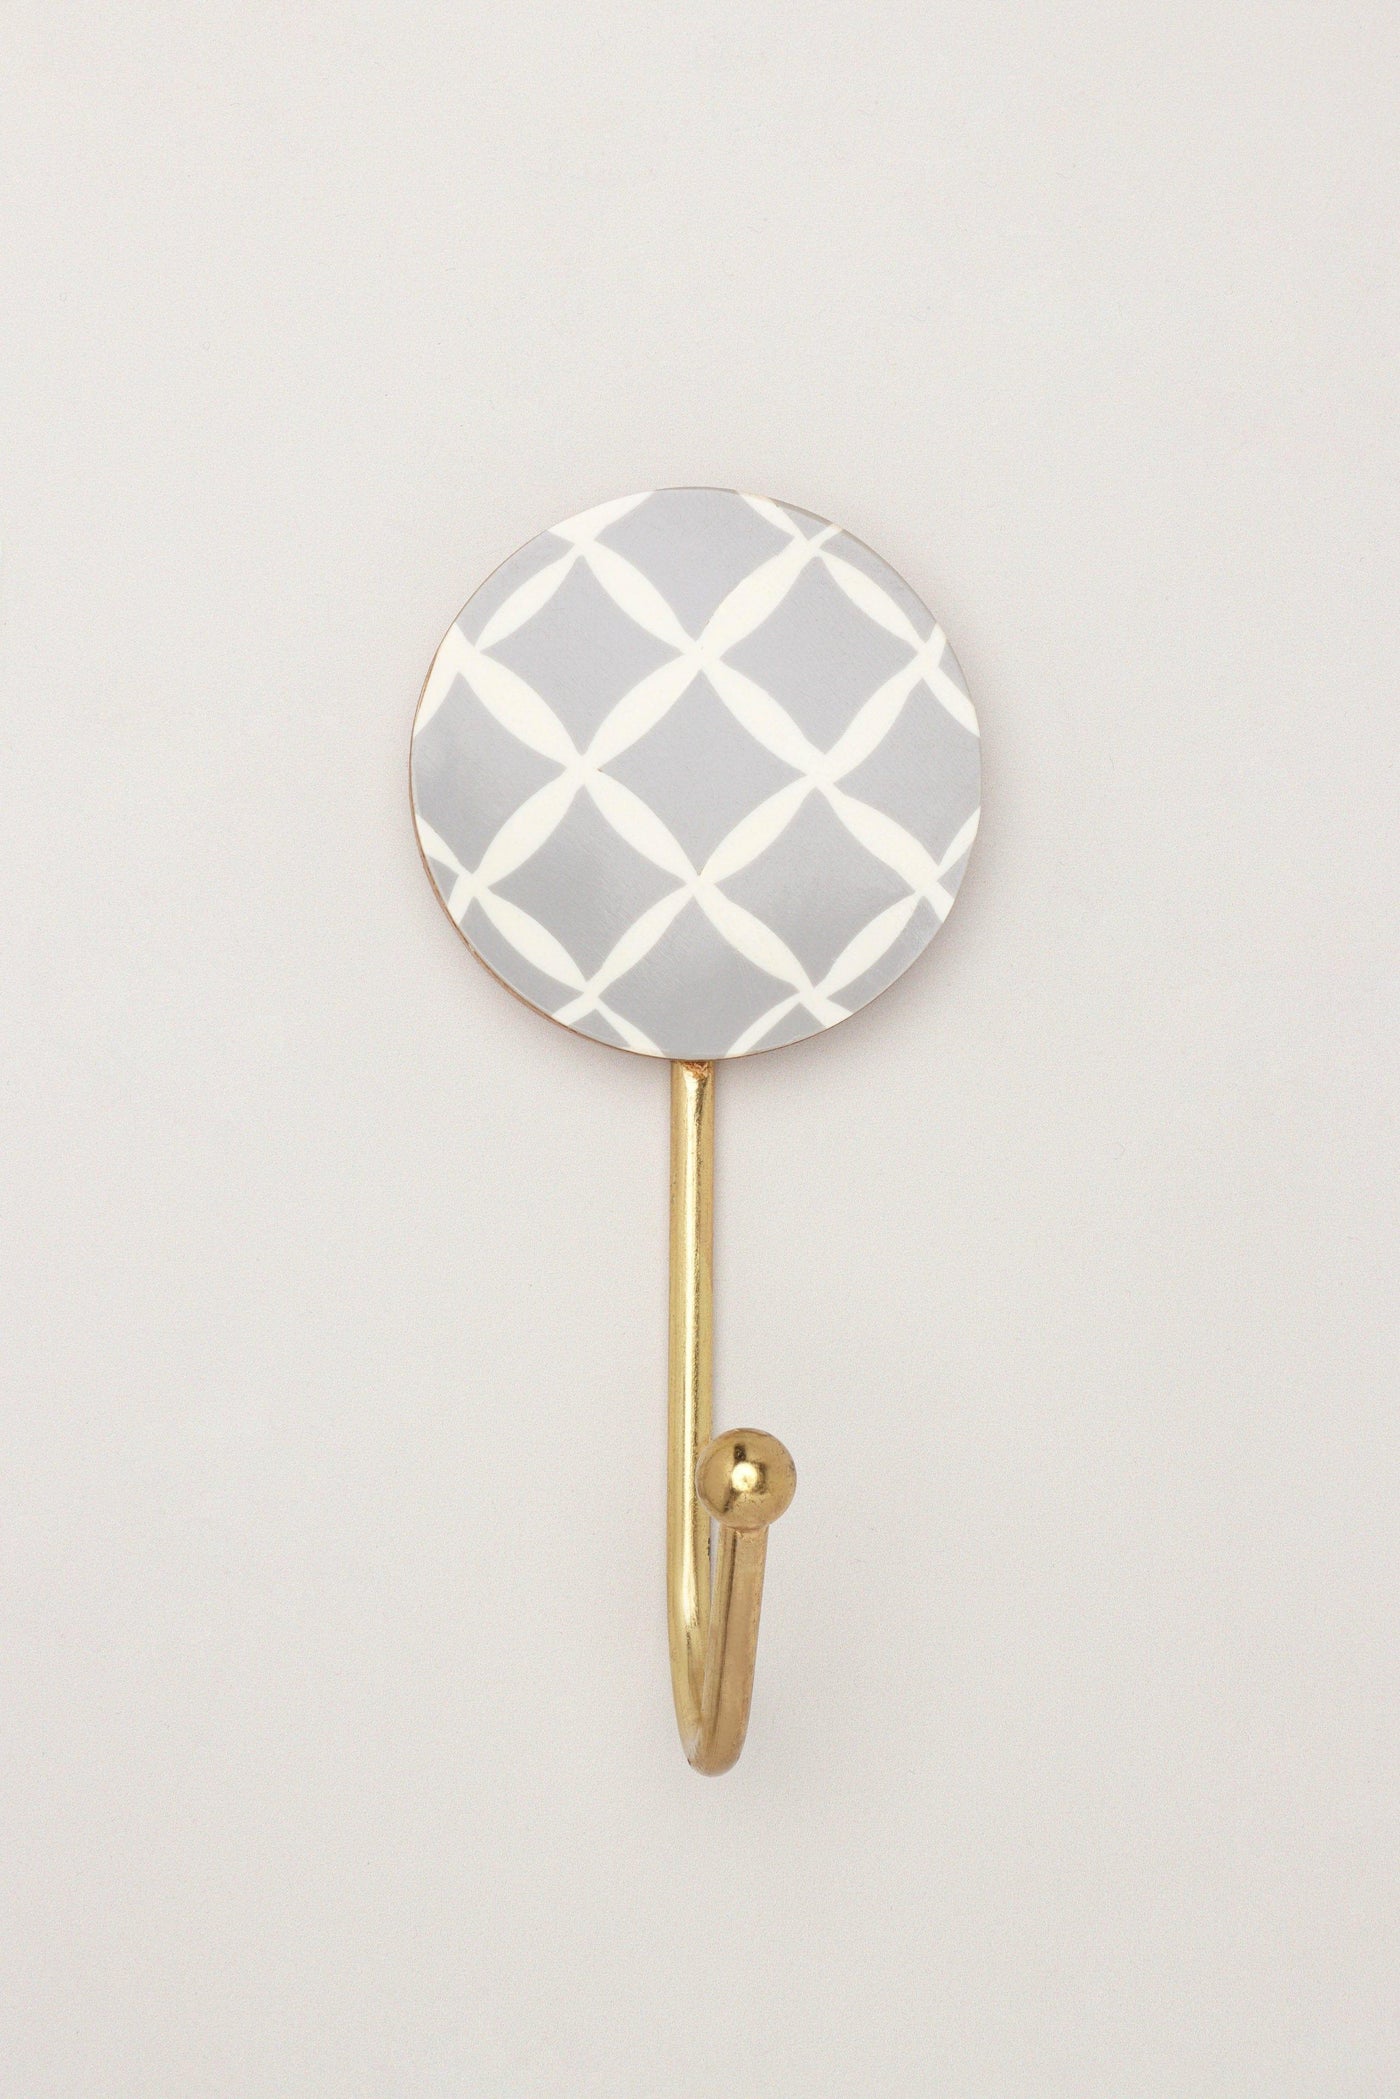 Gdecorstore Cabinet Knobs & Handles Grey Mosaic Large Circle Disk Wood and Resin Brass Geometric Wall Organizer Coat Hook